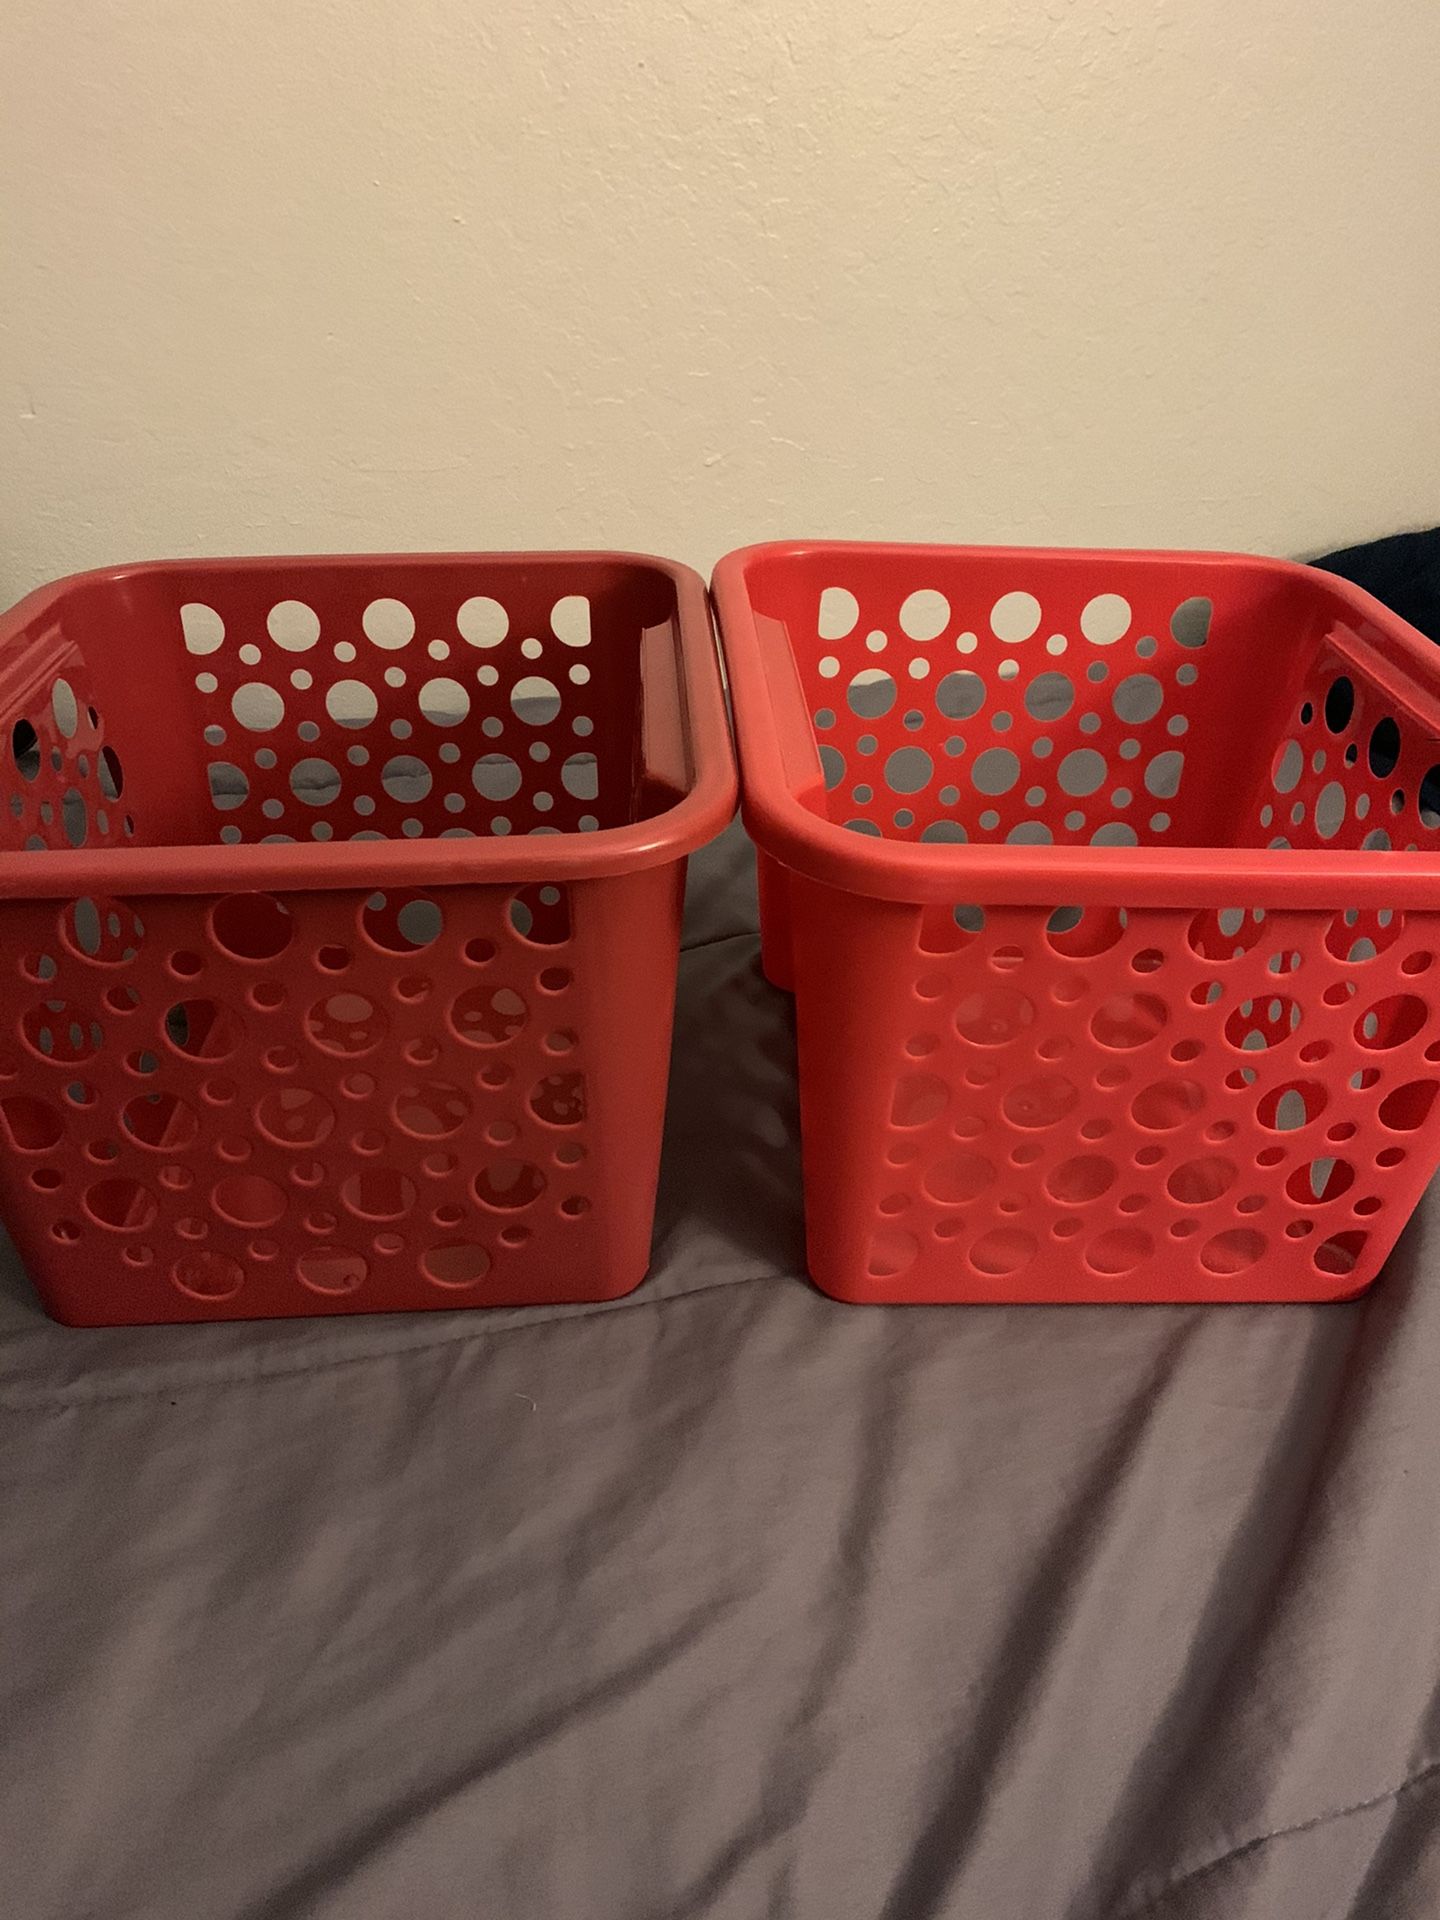 Three red storage containers